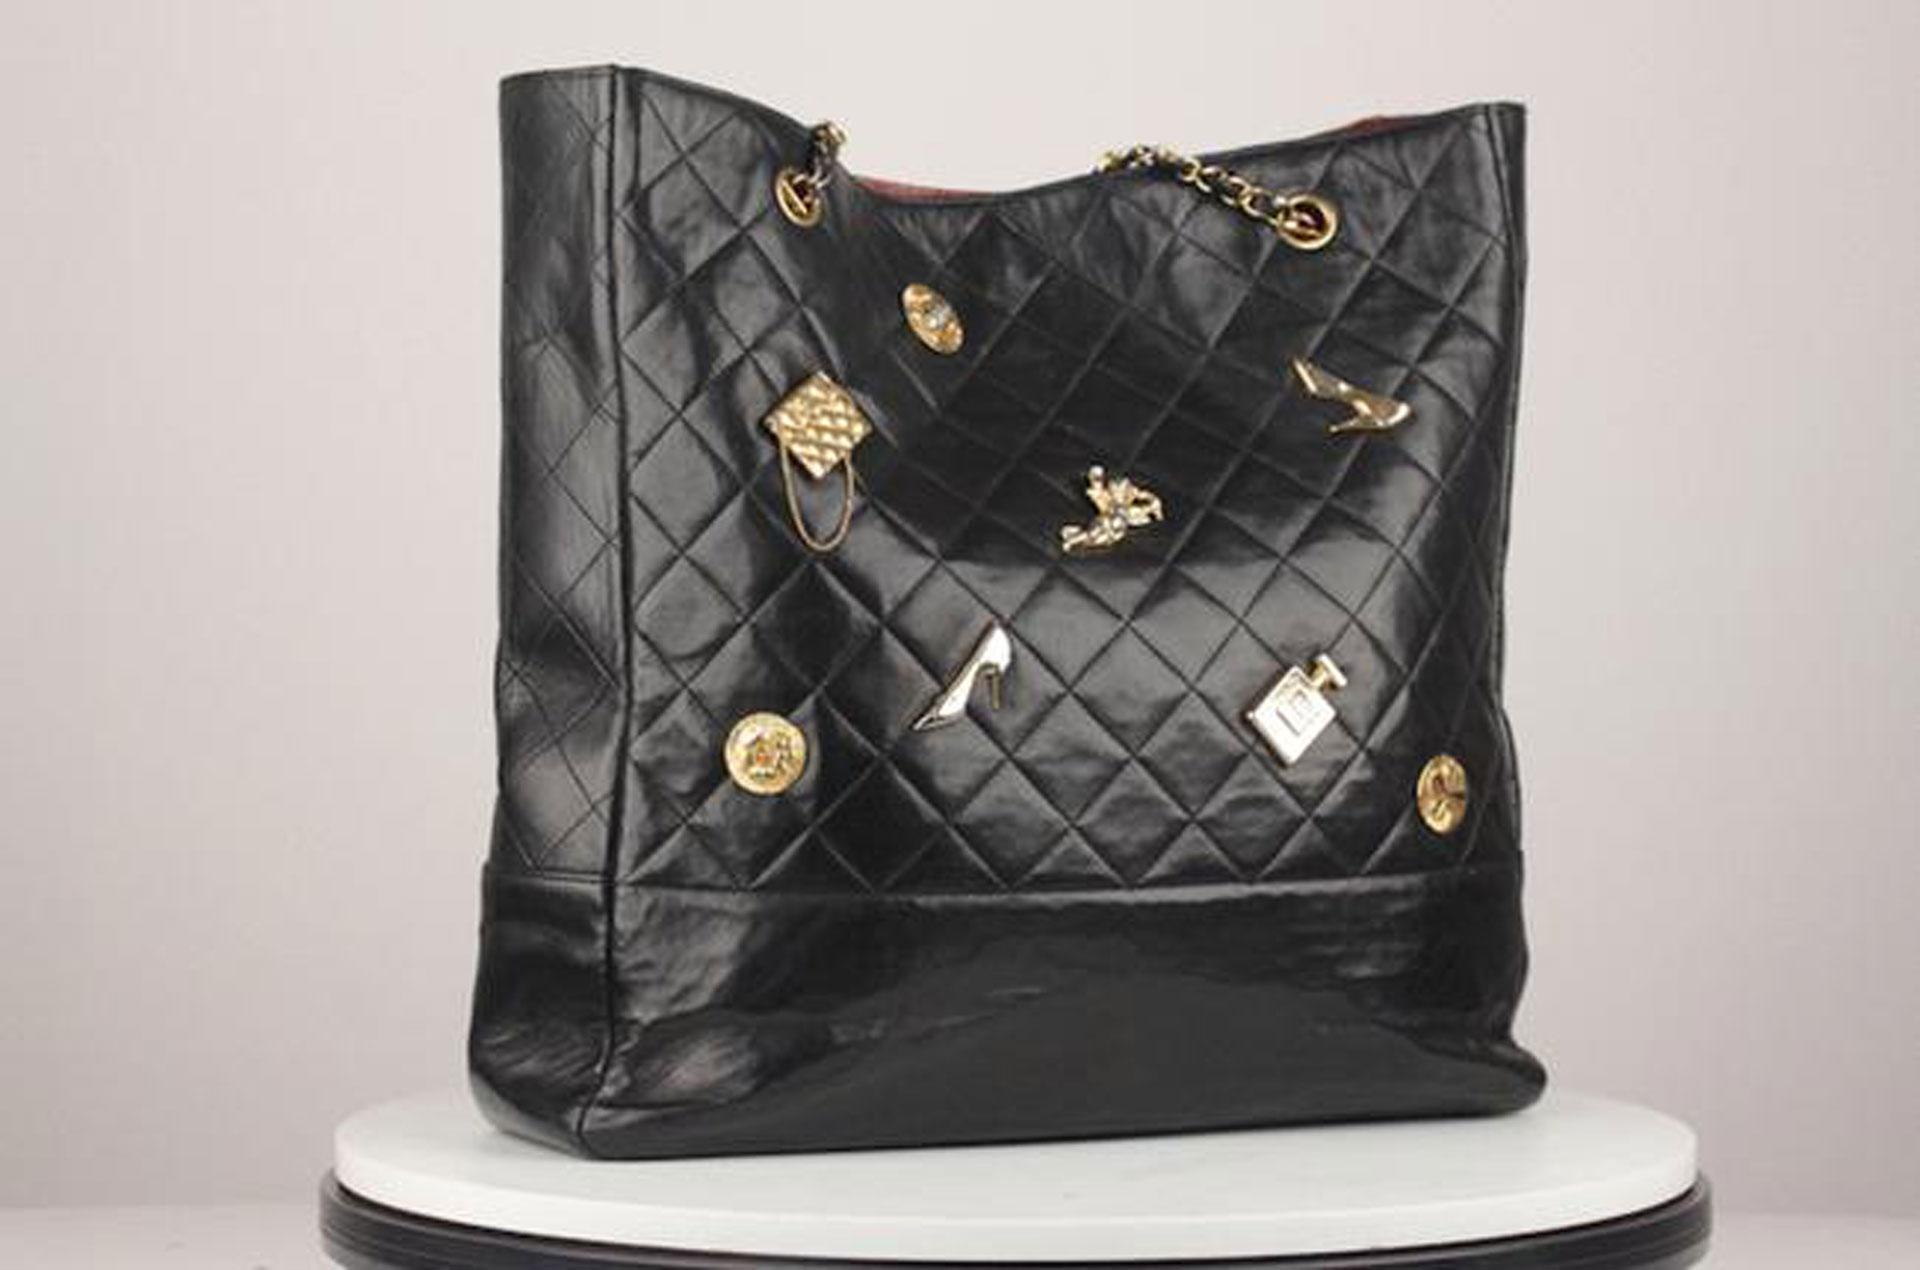 Chanel Timeless Bag Rare Vintage 1990's Limited Edition Lucky Charm Black Tote

Made in France